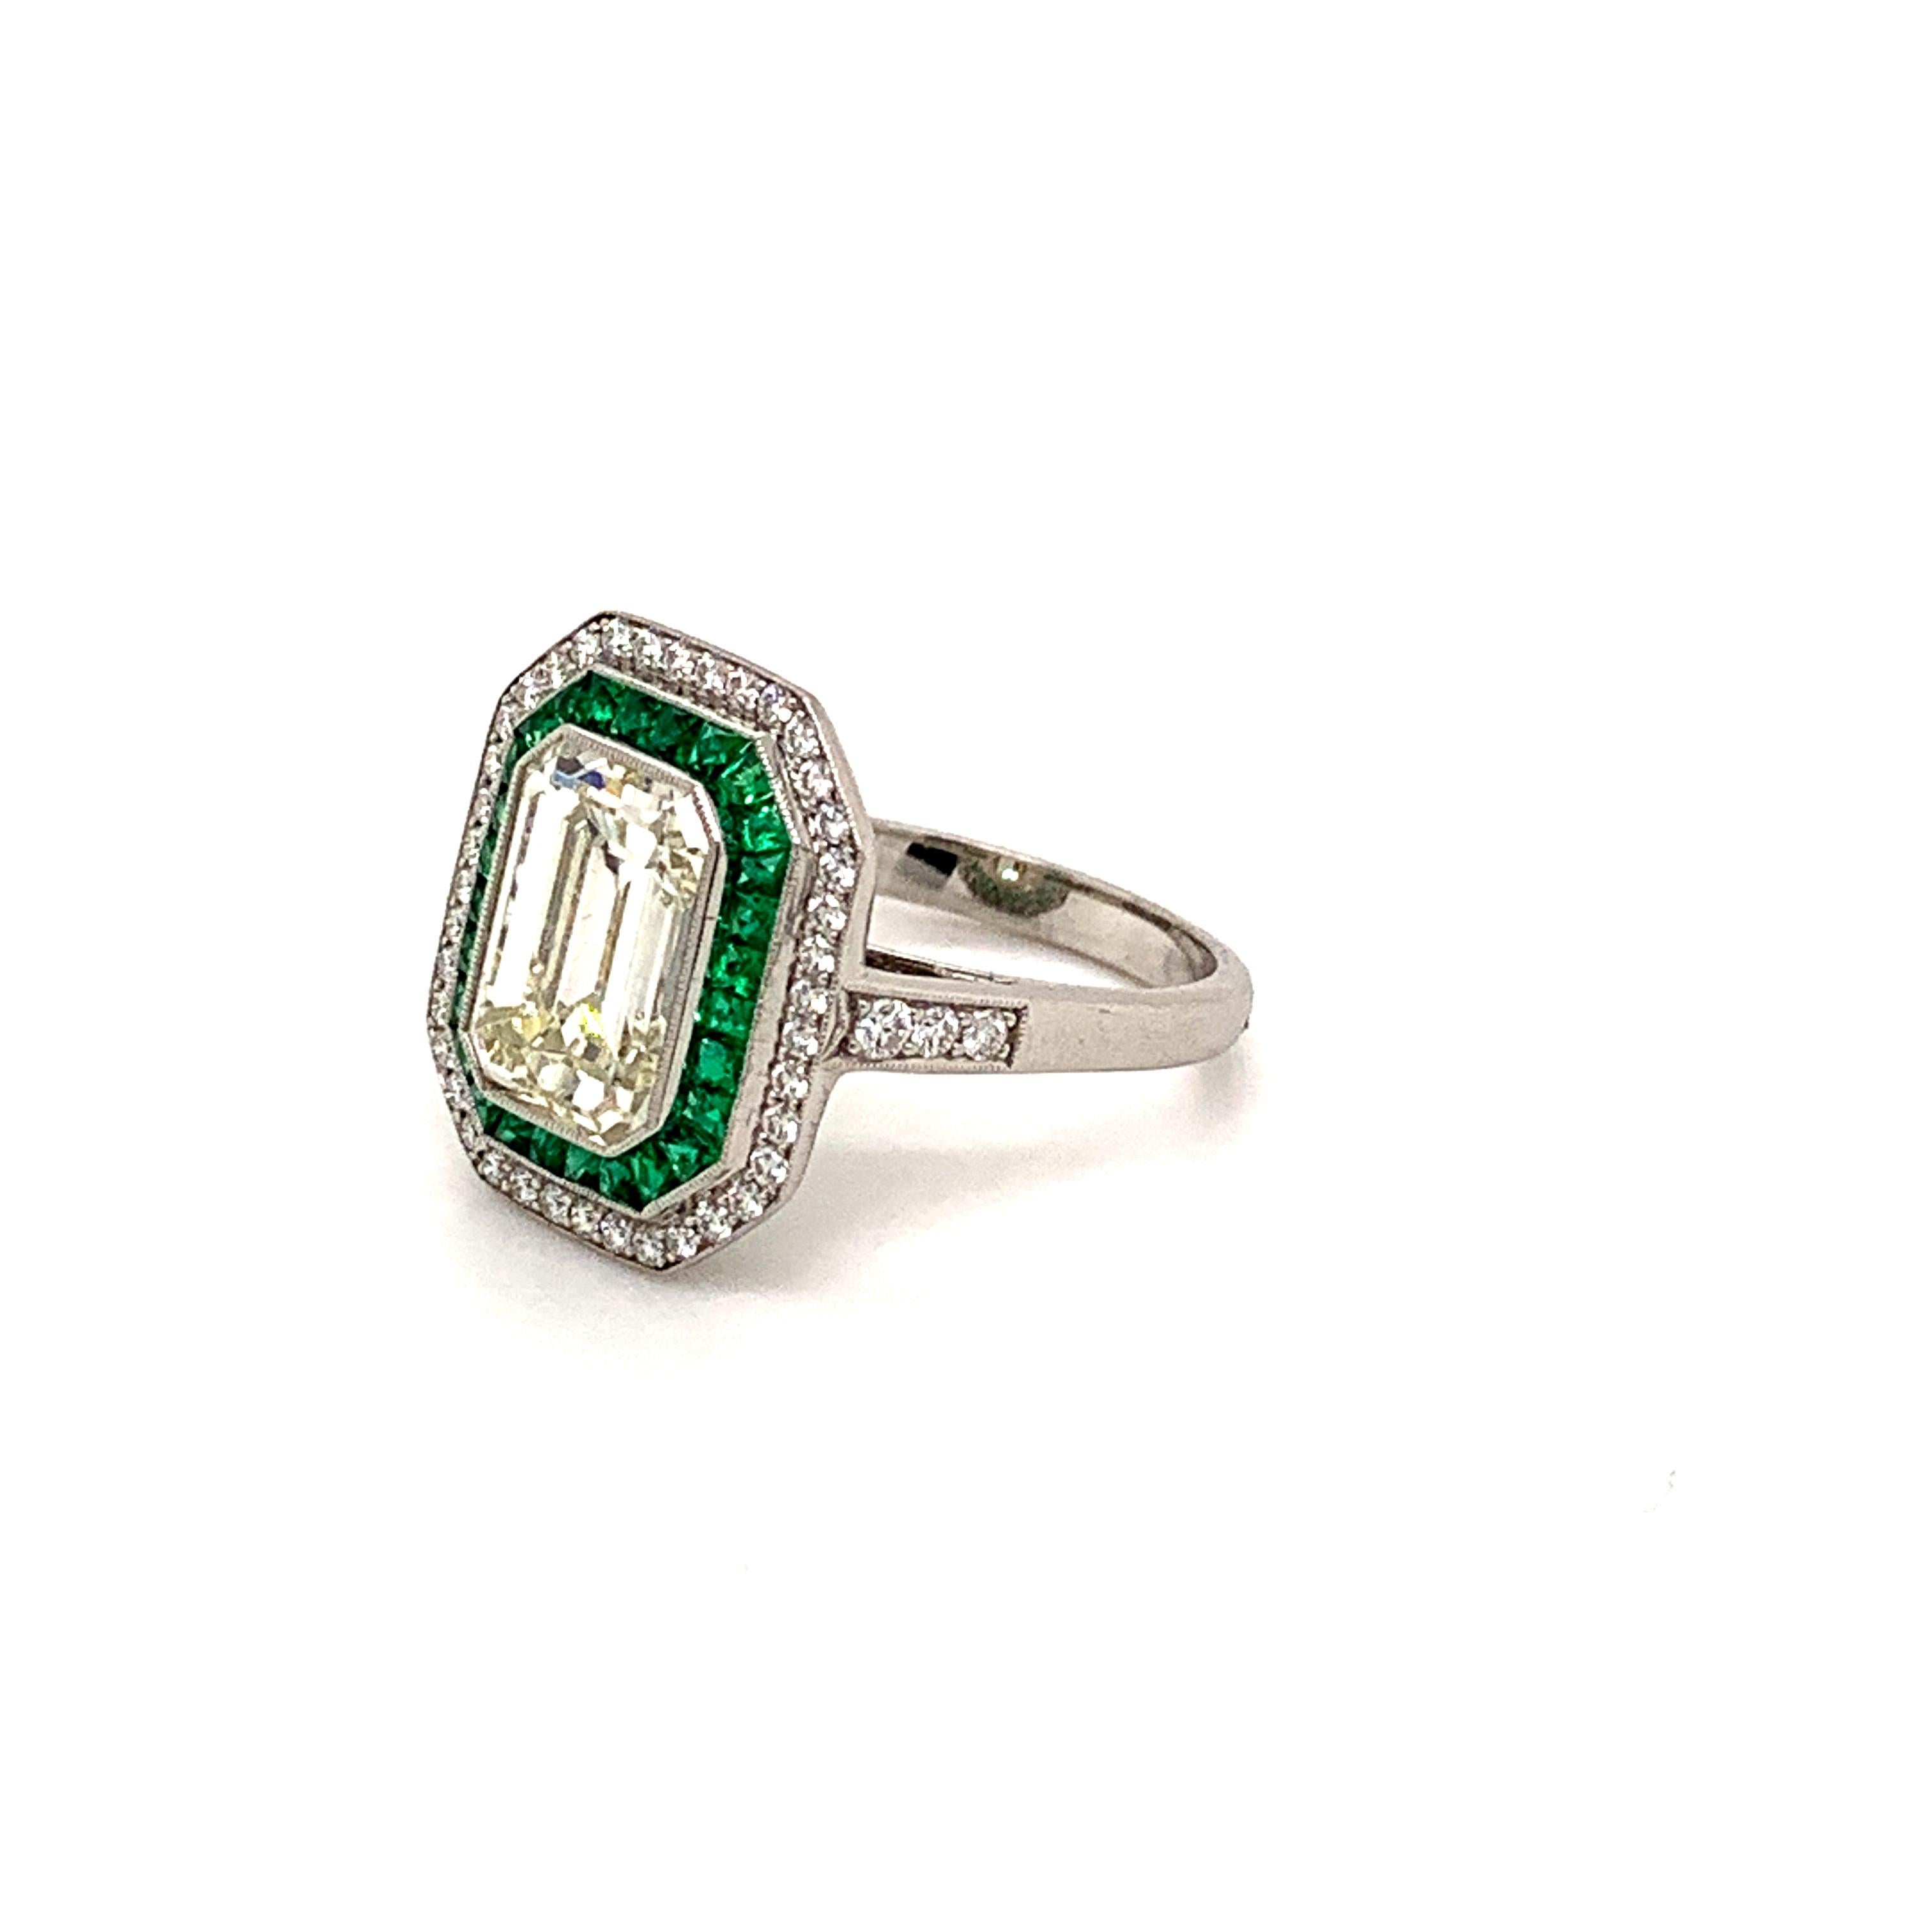 Sophia D's Art Deco inspired platinum ring that features an emerald cut diamond weighing 2.84 carats accented by small round diamonds with the total weight of 0.31 carat and French cut green emeralds weighing 0.50 carats.

Sophia D by Joseph